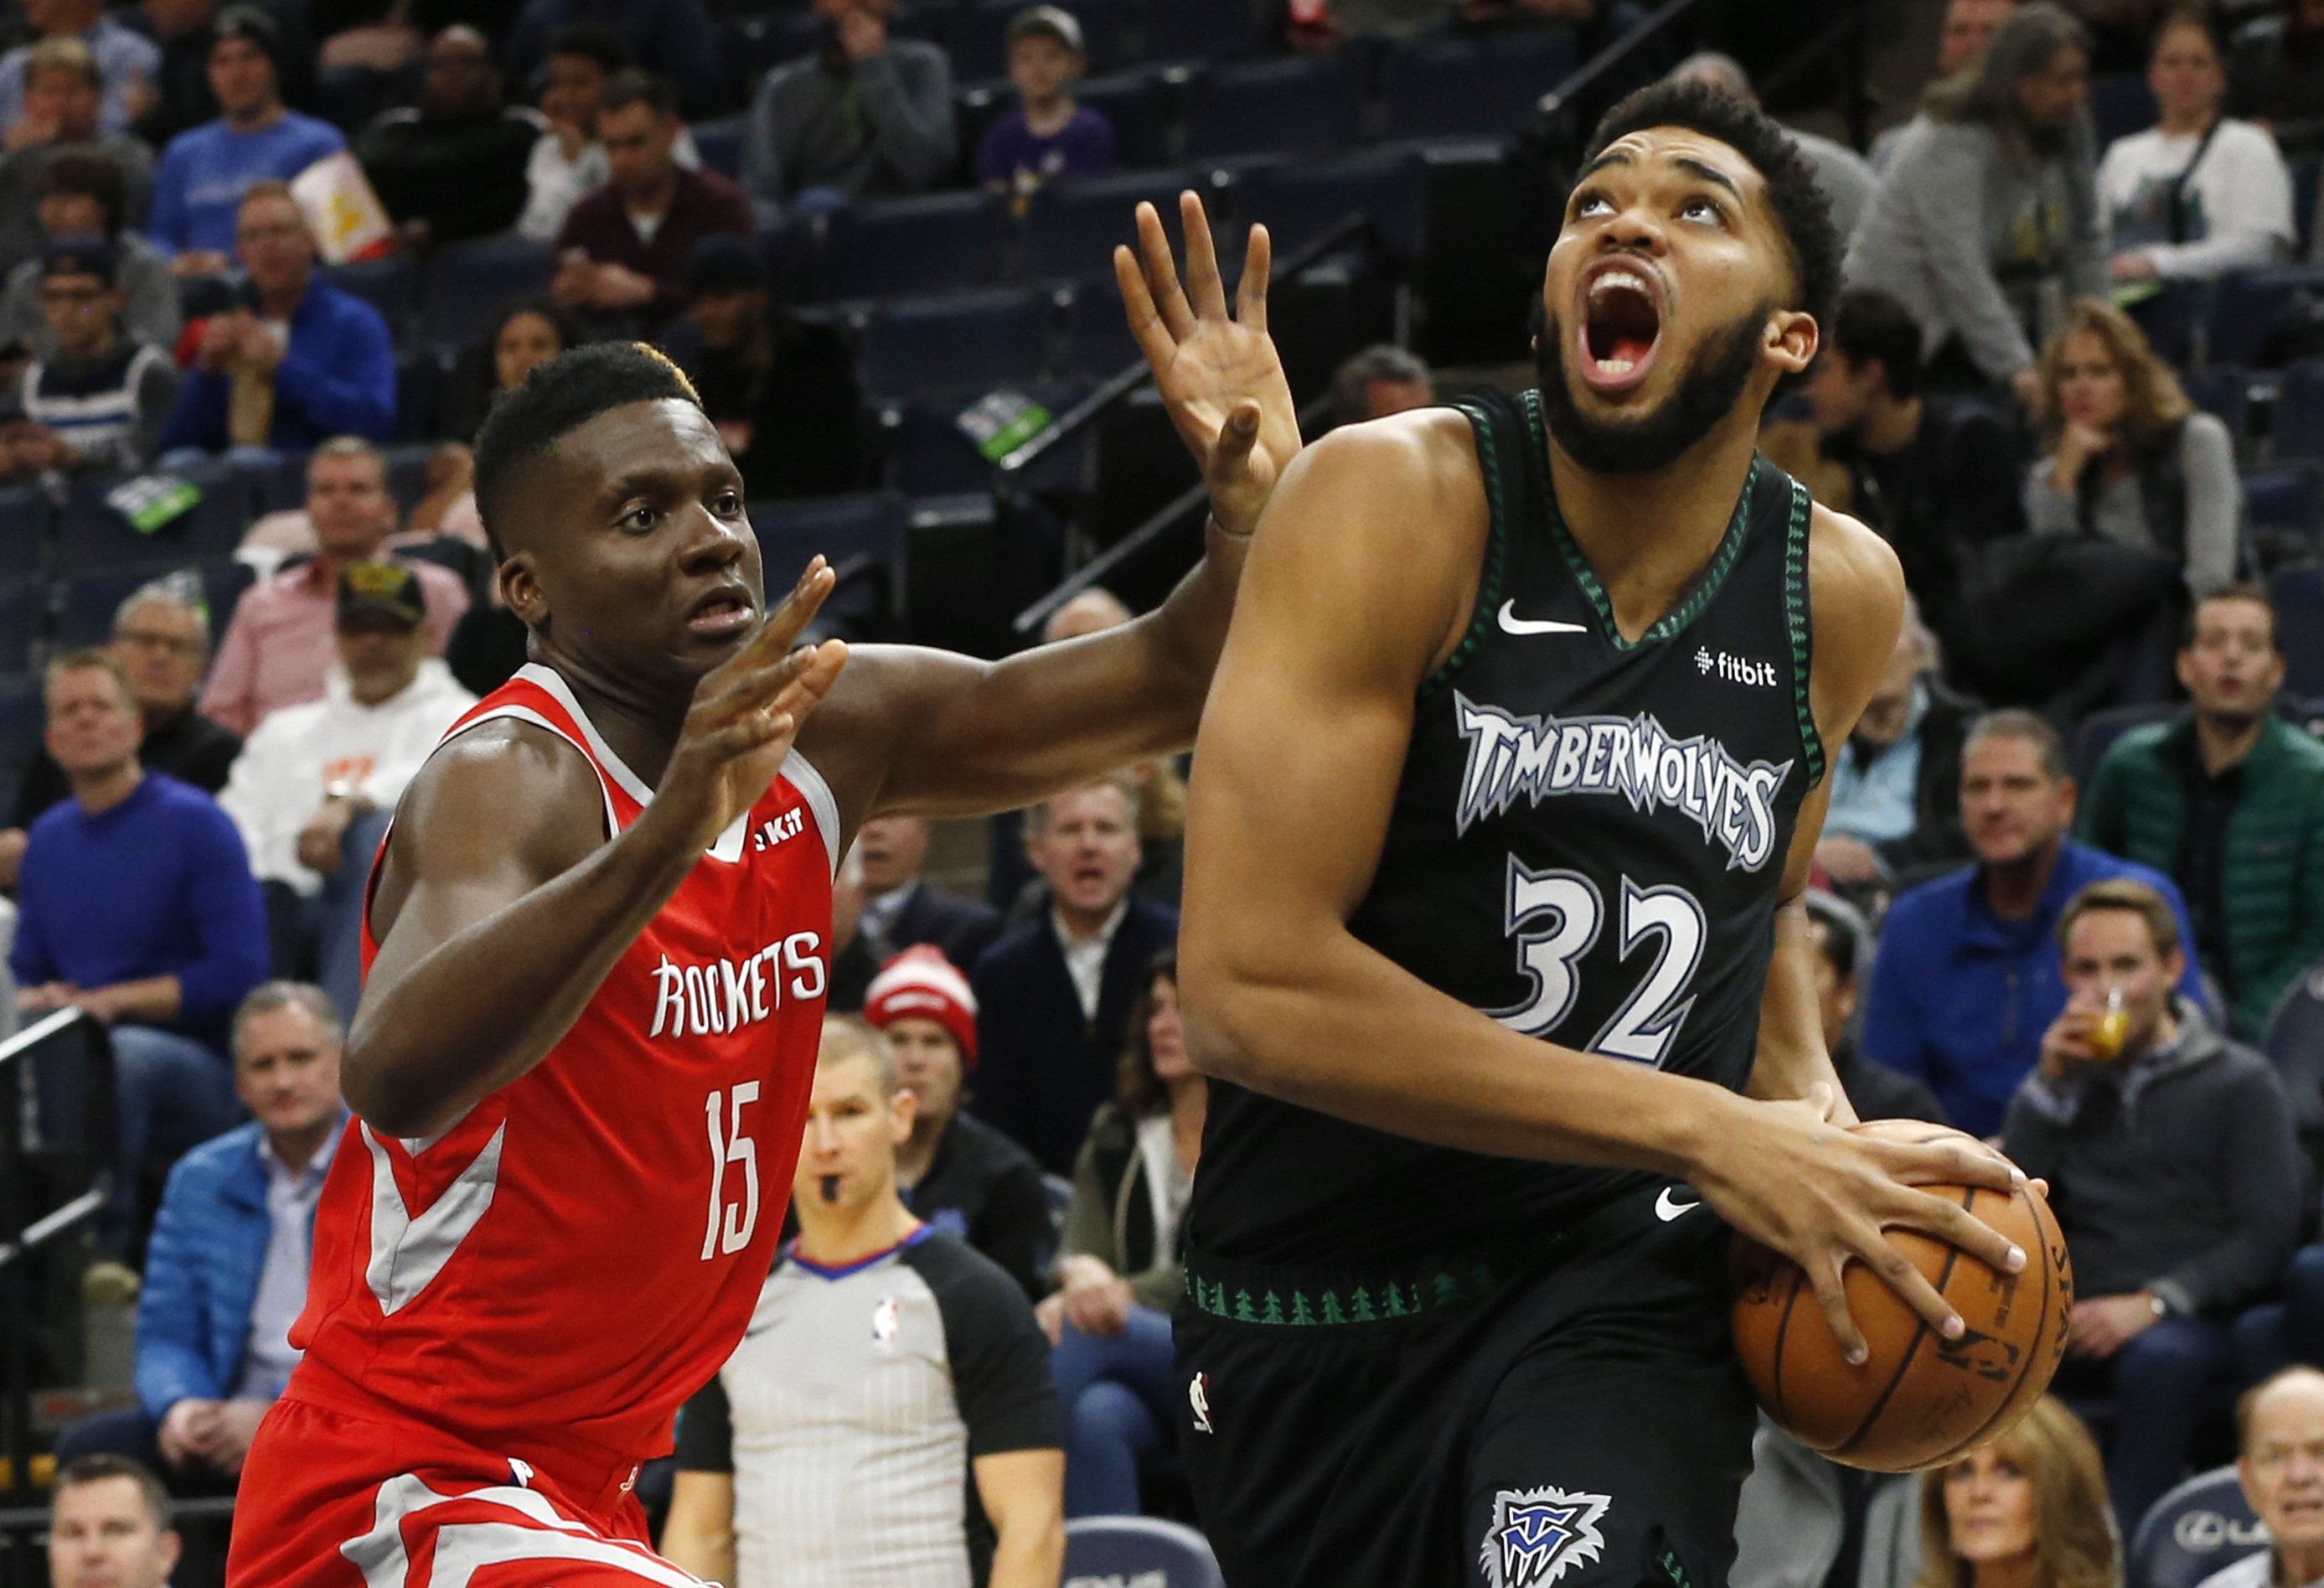 Emerging Edwards gives Towns, T-wolves infusion of optimism